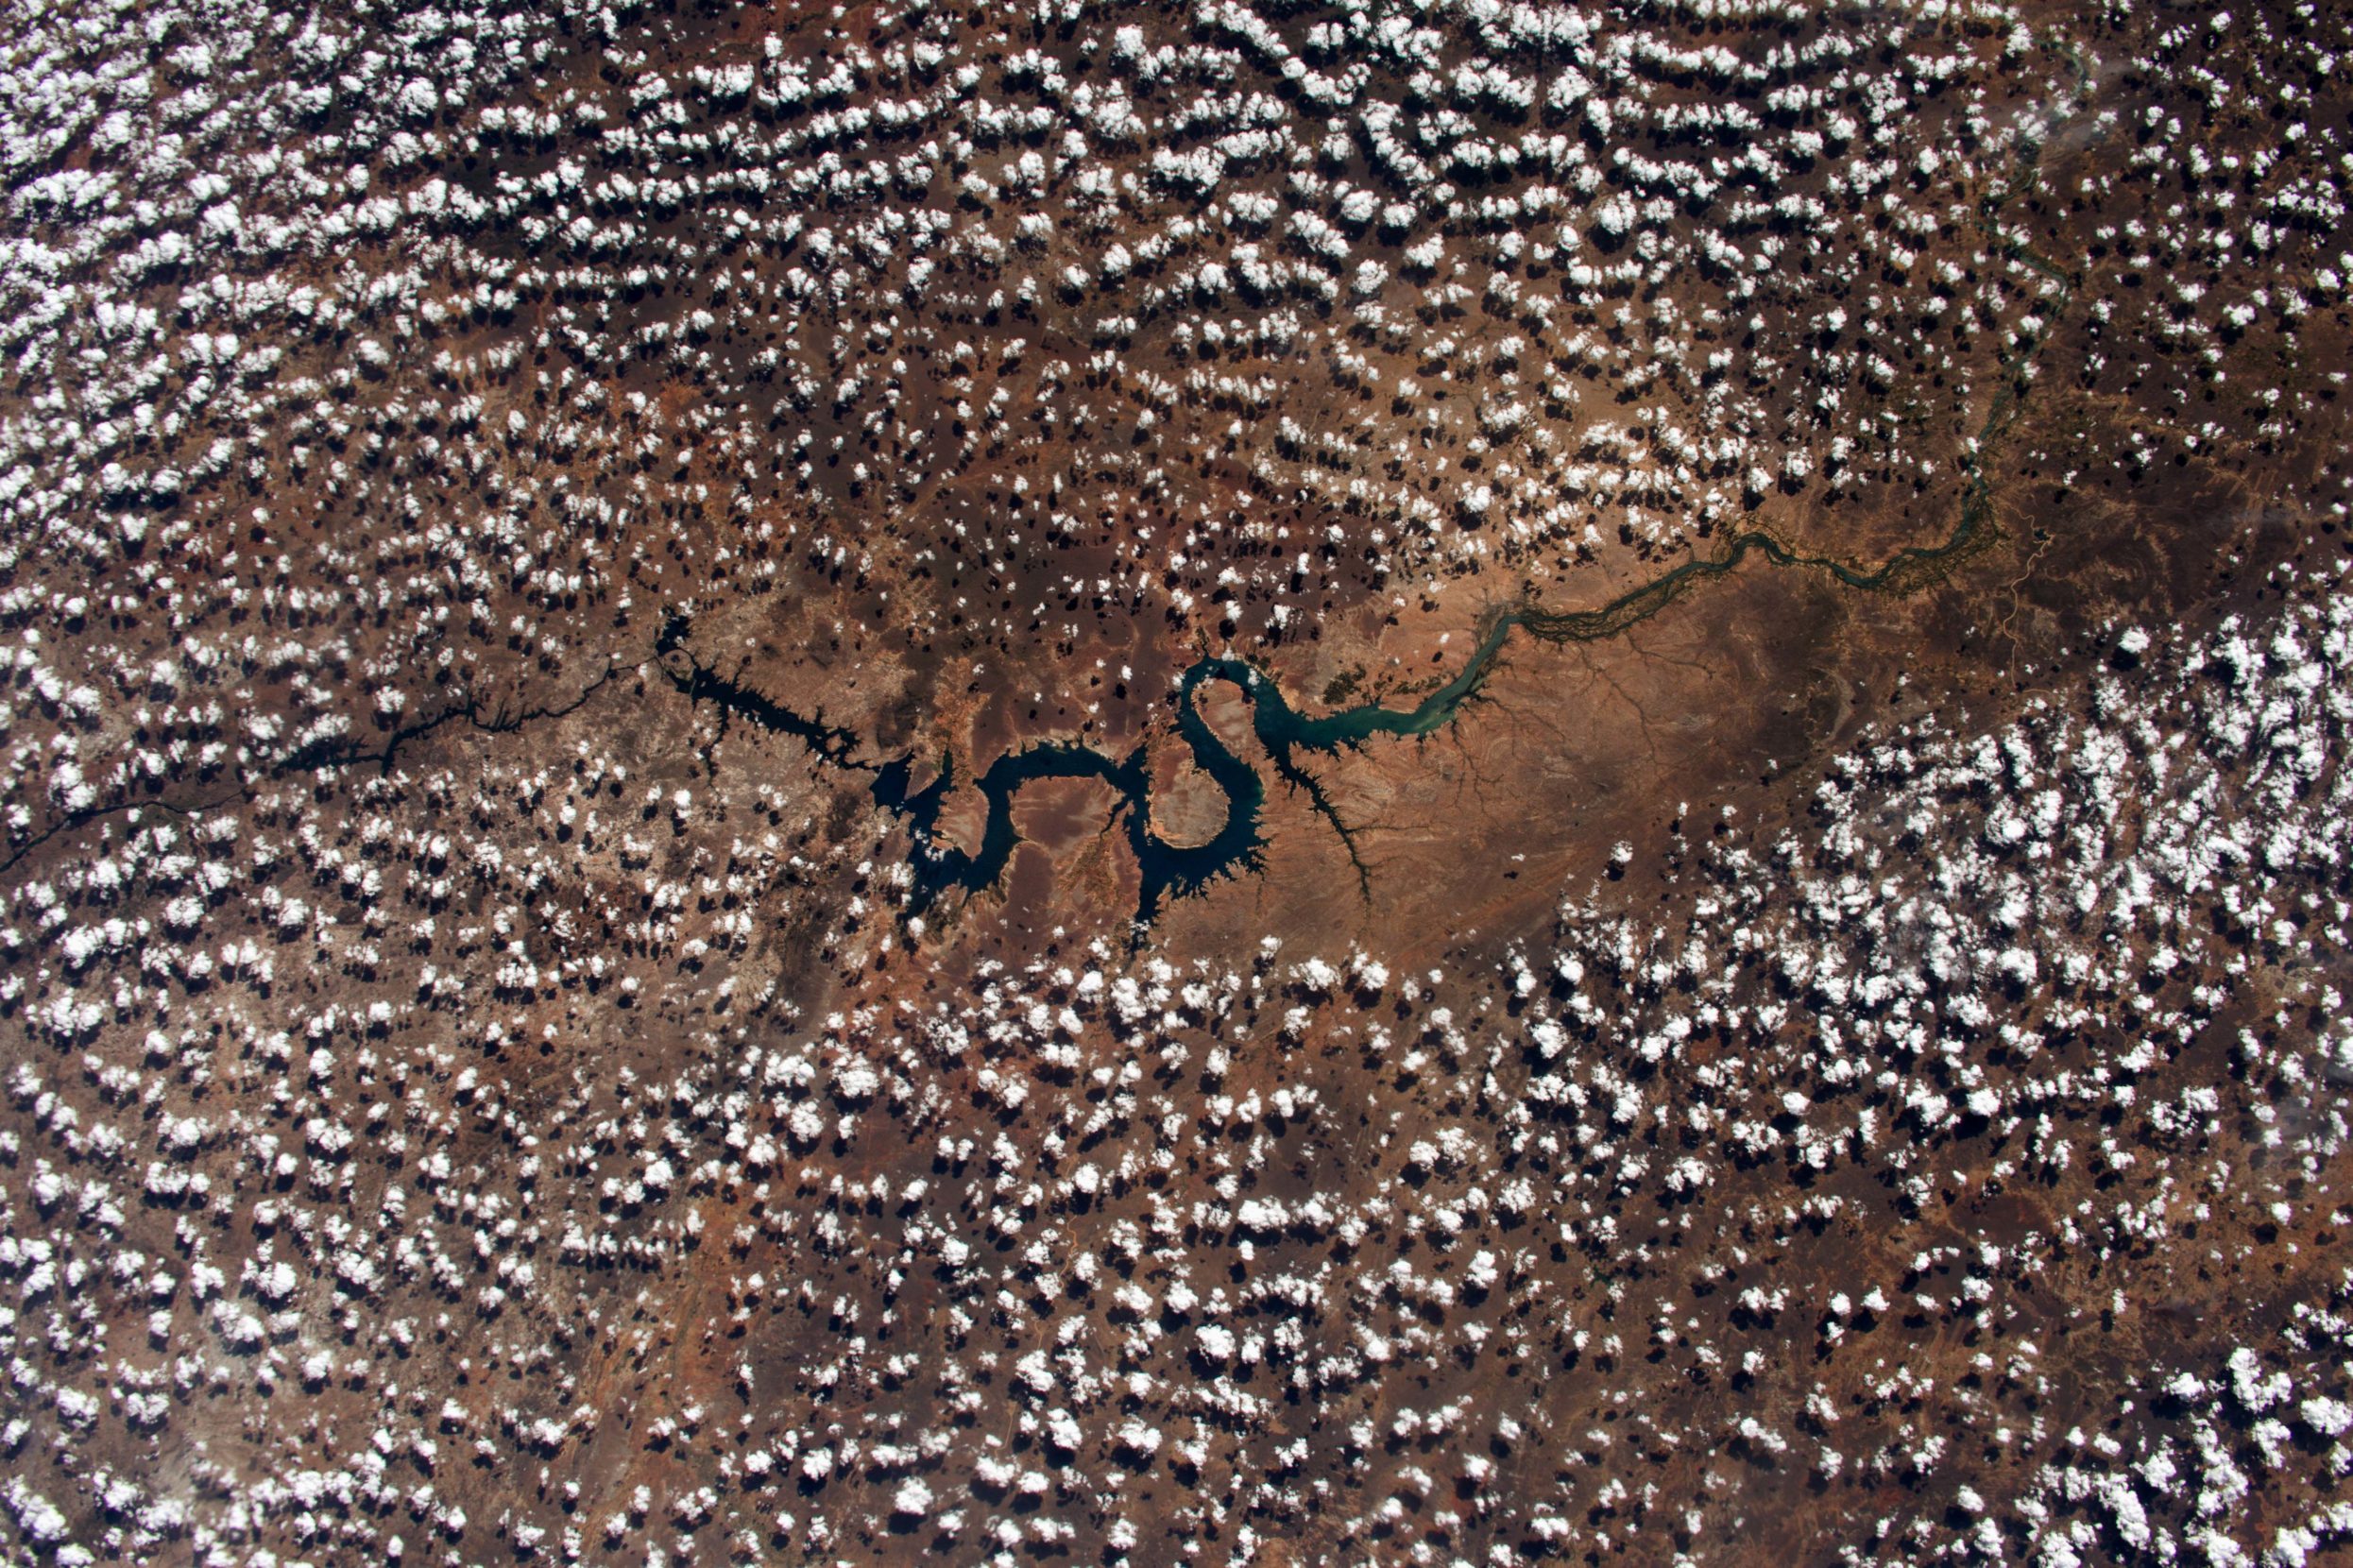 As captured from space, the São Francisco River carves out the shape of a dragon as it wends through the arid hinterland of Brazil. Photo: ESA/NASA.